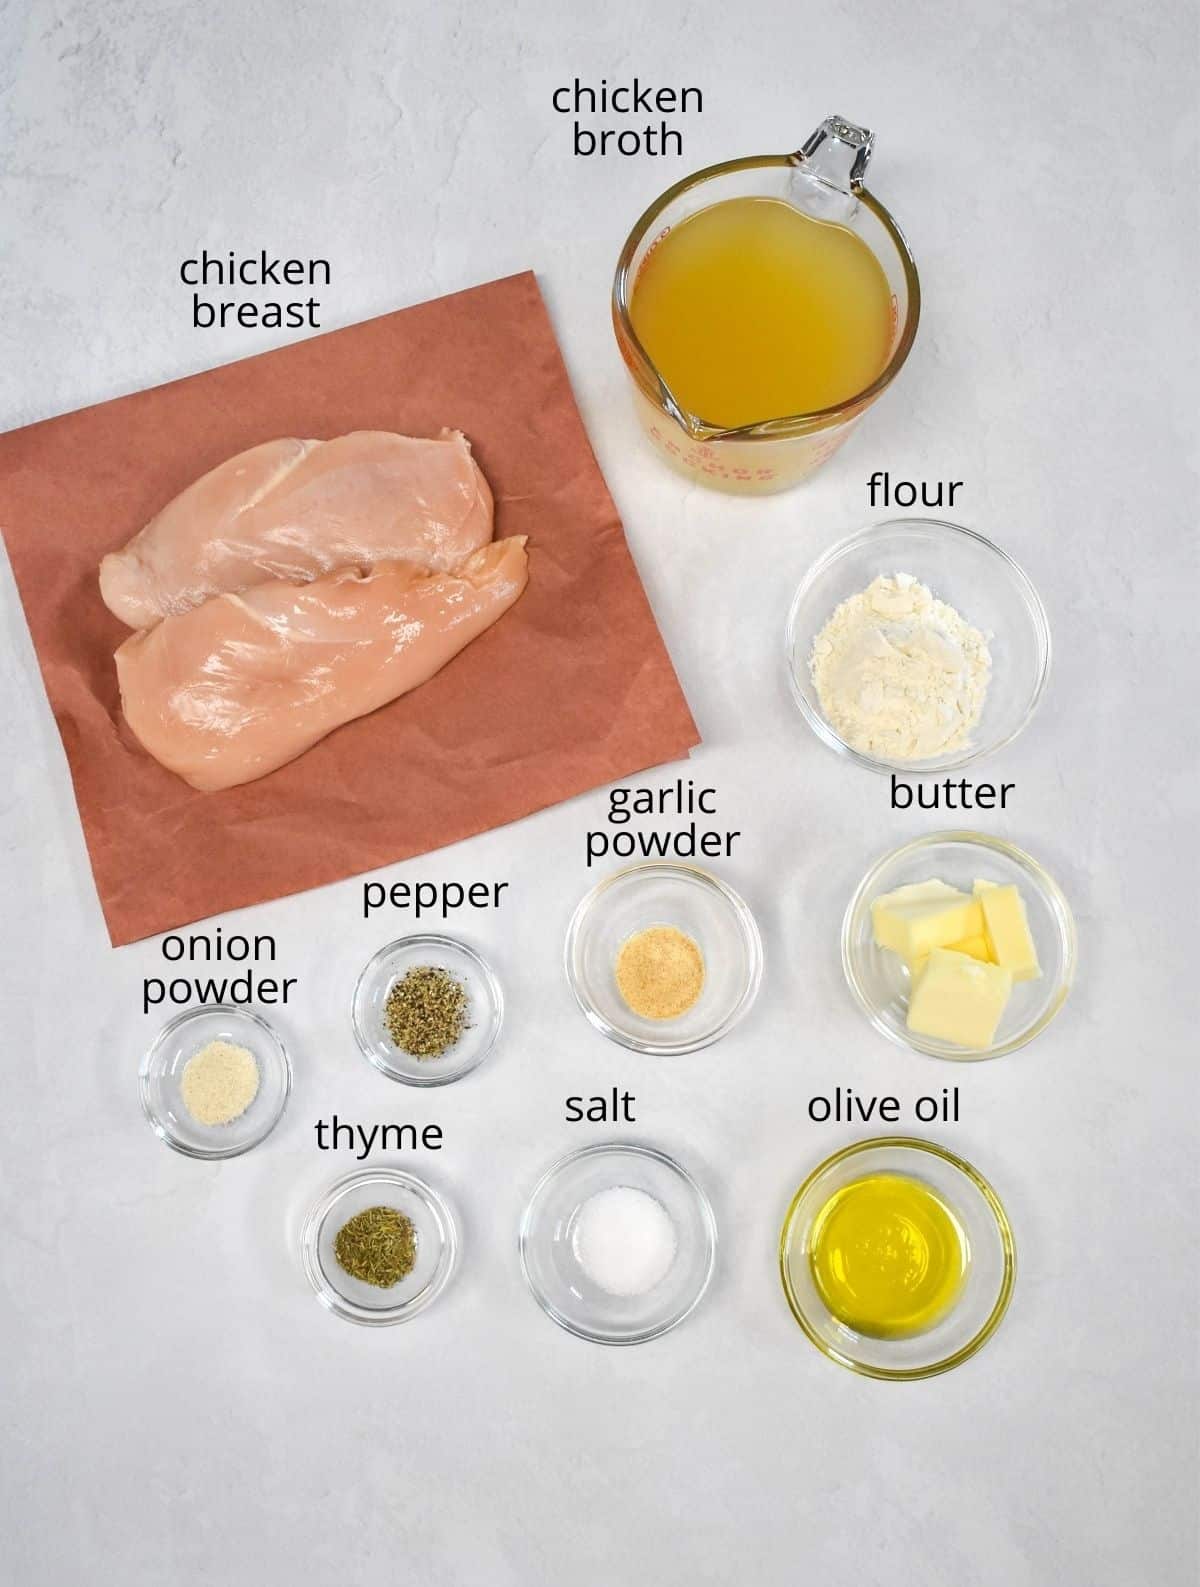 The ingredients for the dish prepped and arranged in glass bowls on a white table. The chicken is on butcher paper. Each ingredient has a label with the name above it in small black letters.